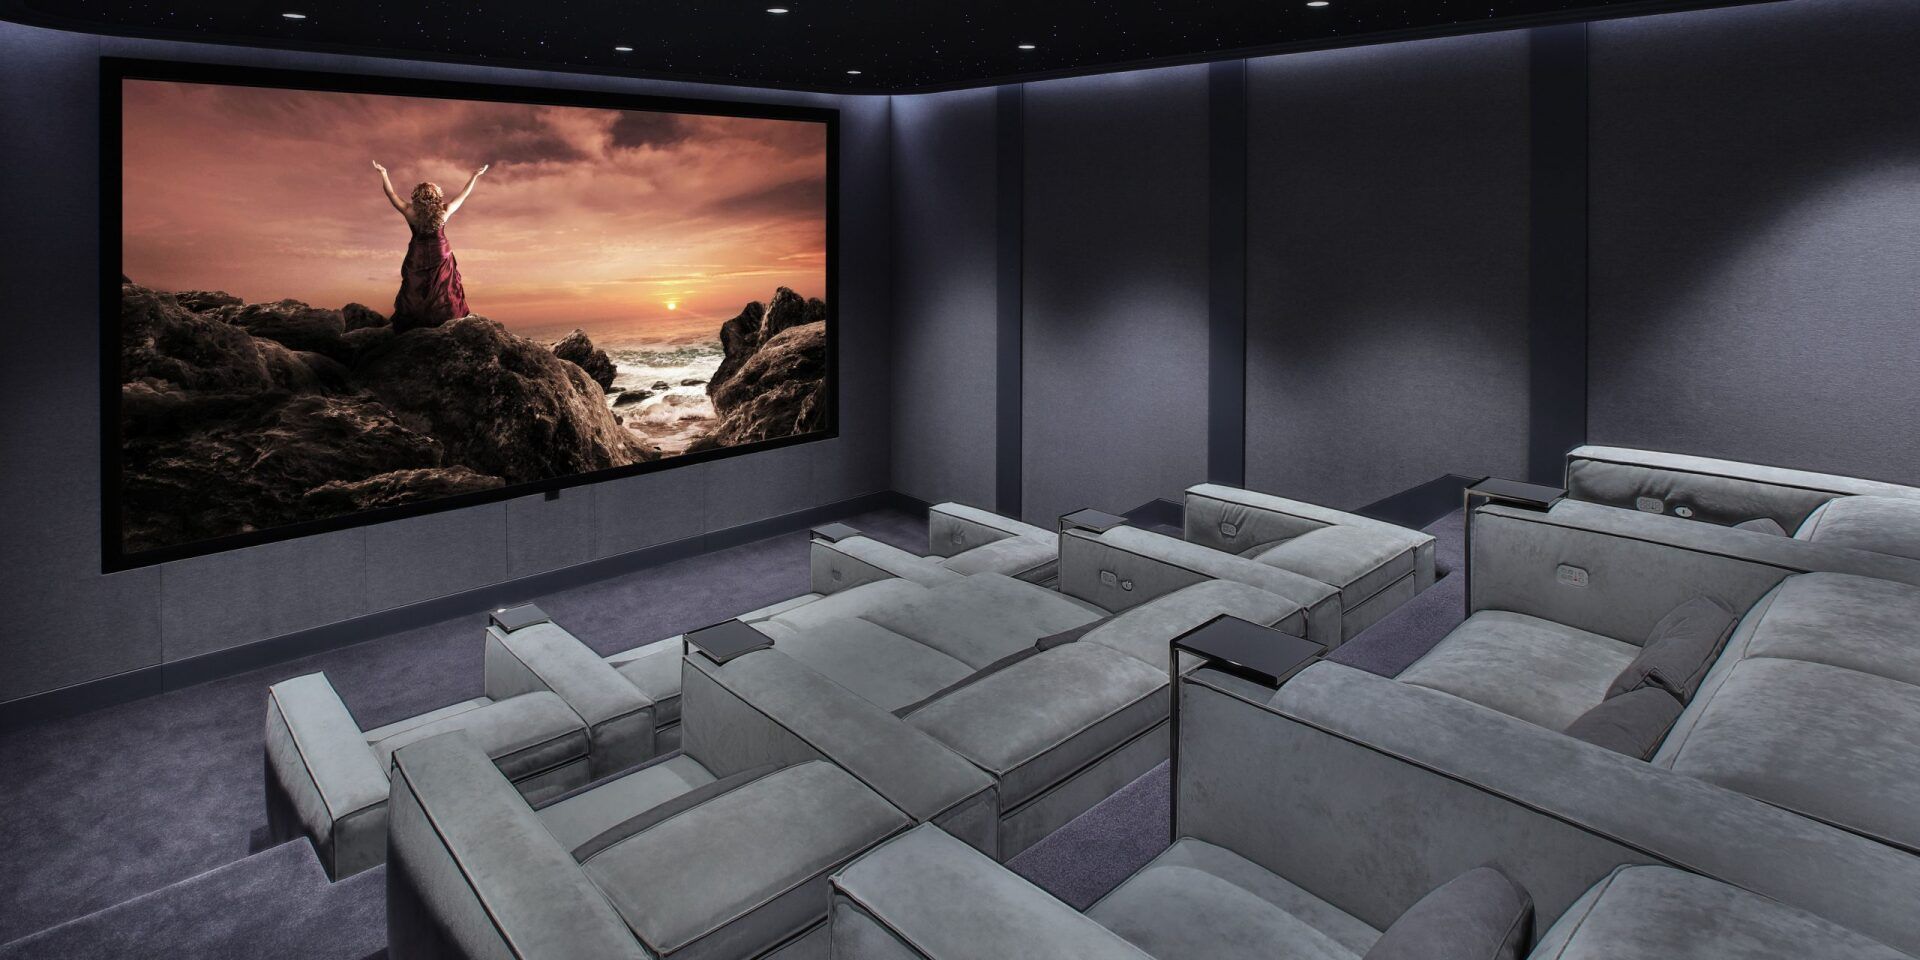 A home theater with a large screen and lots of seats